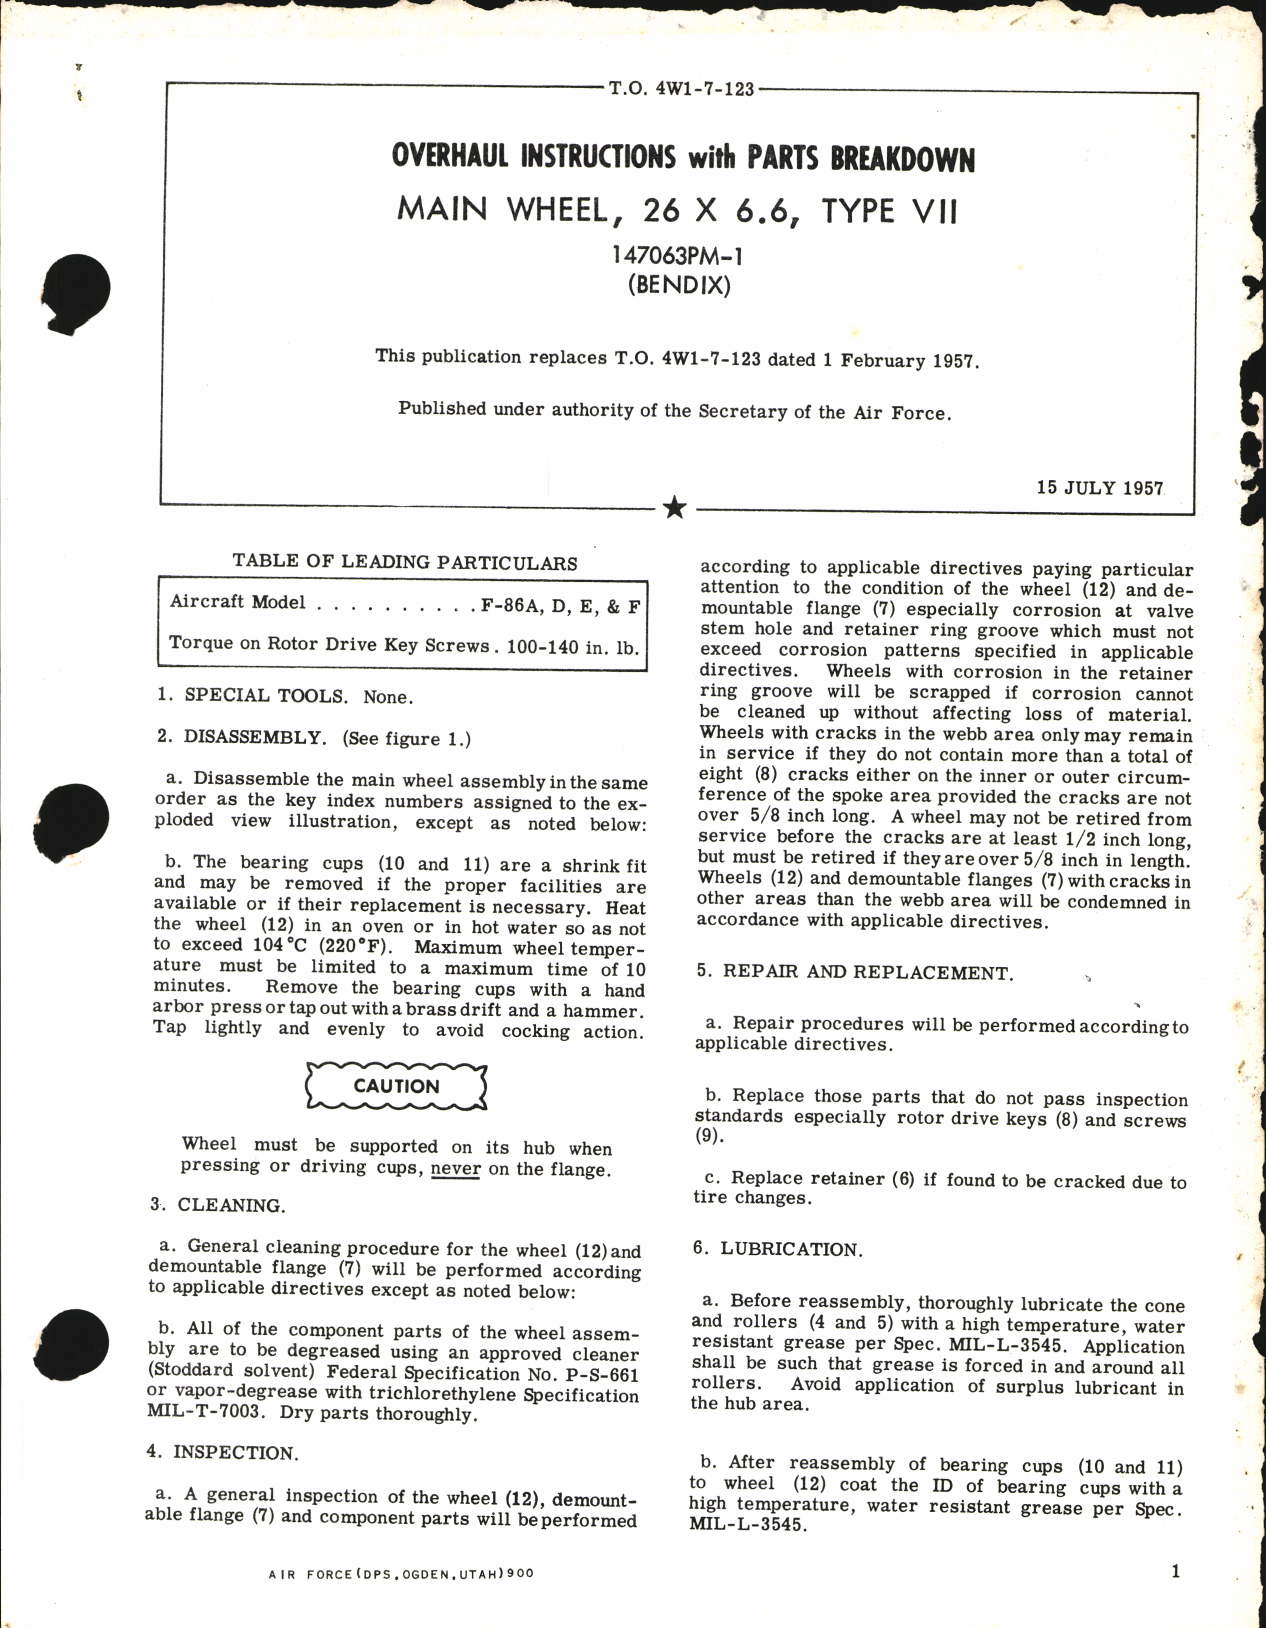 Sample page 1 from AirCorps Library document: Overhaul Instructions with Parts Breakdown for Main Wheel 26 x 6.6, Type VII